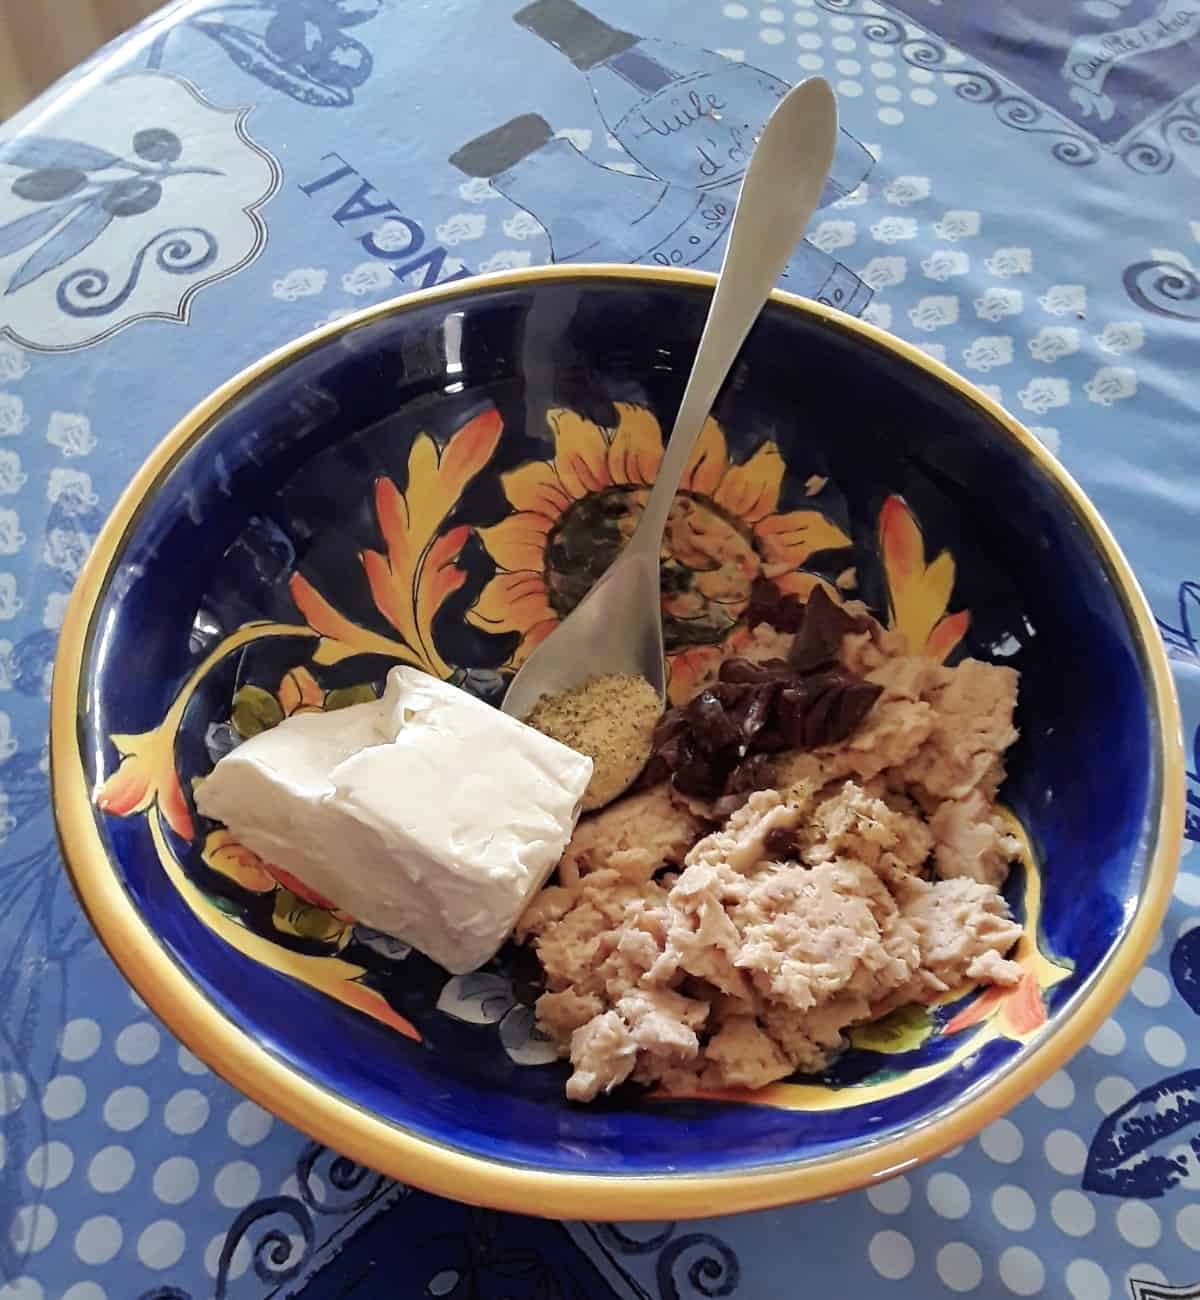 Cream cheese, tuna, olives and seasoning in blue mixing bowl with spoon.